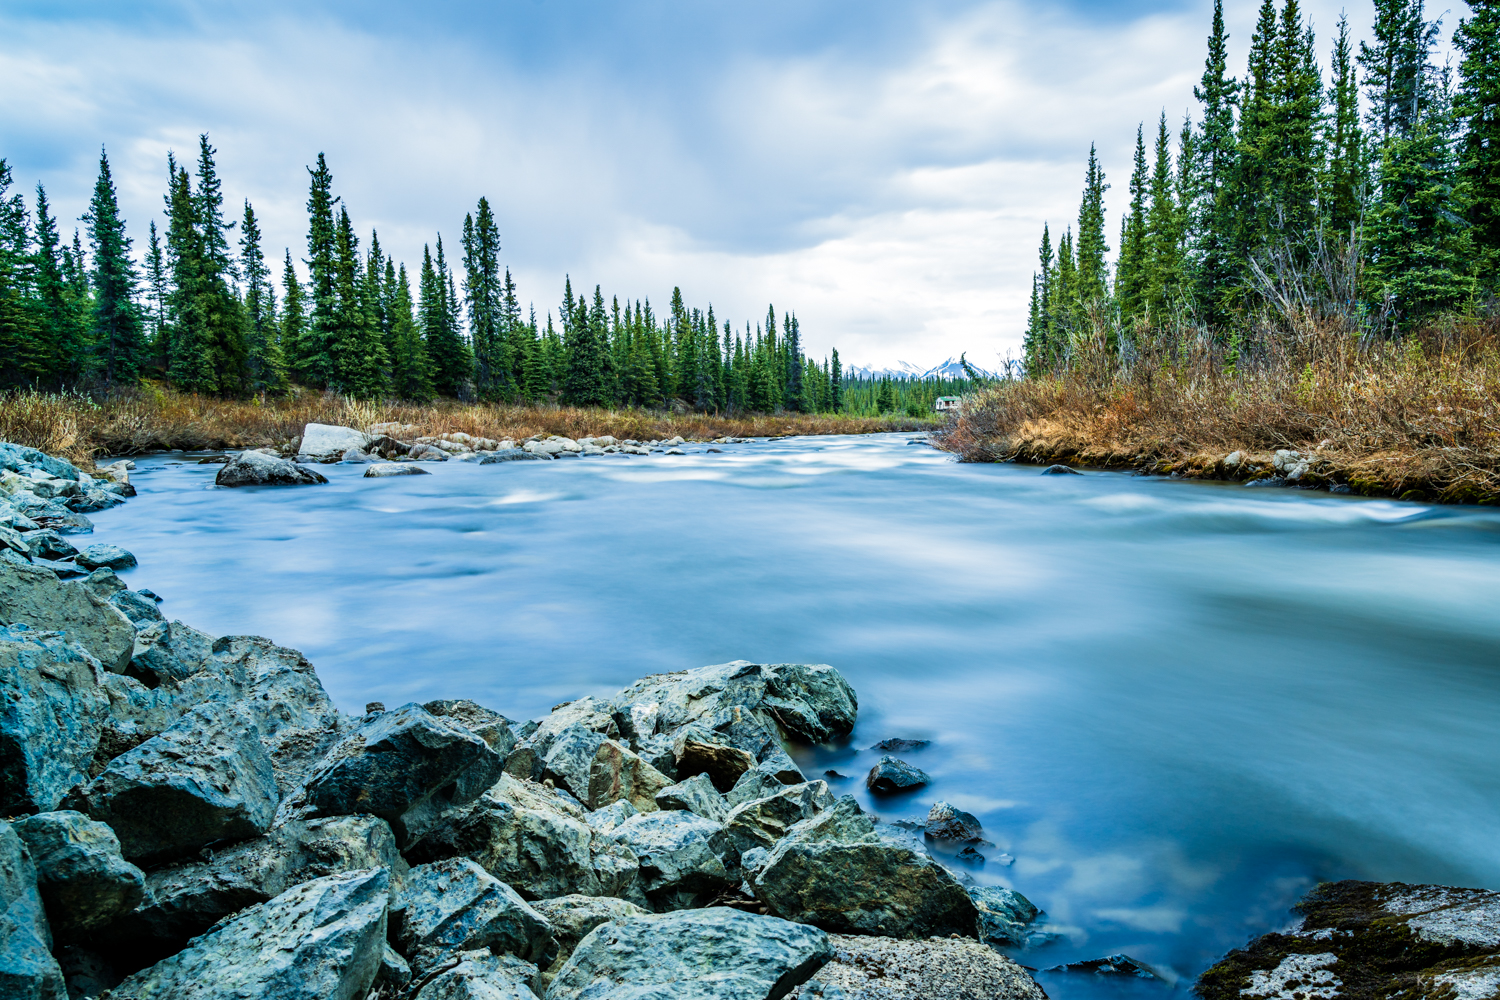 A cabin stands by a remote river along the Denali Highway, deep in the heart of Alaska.